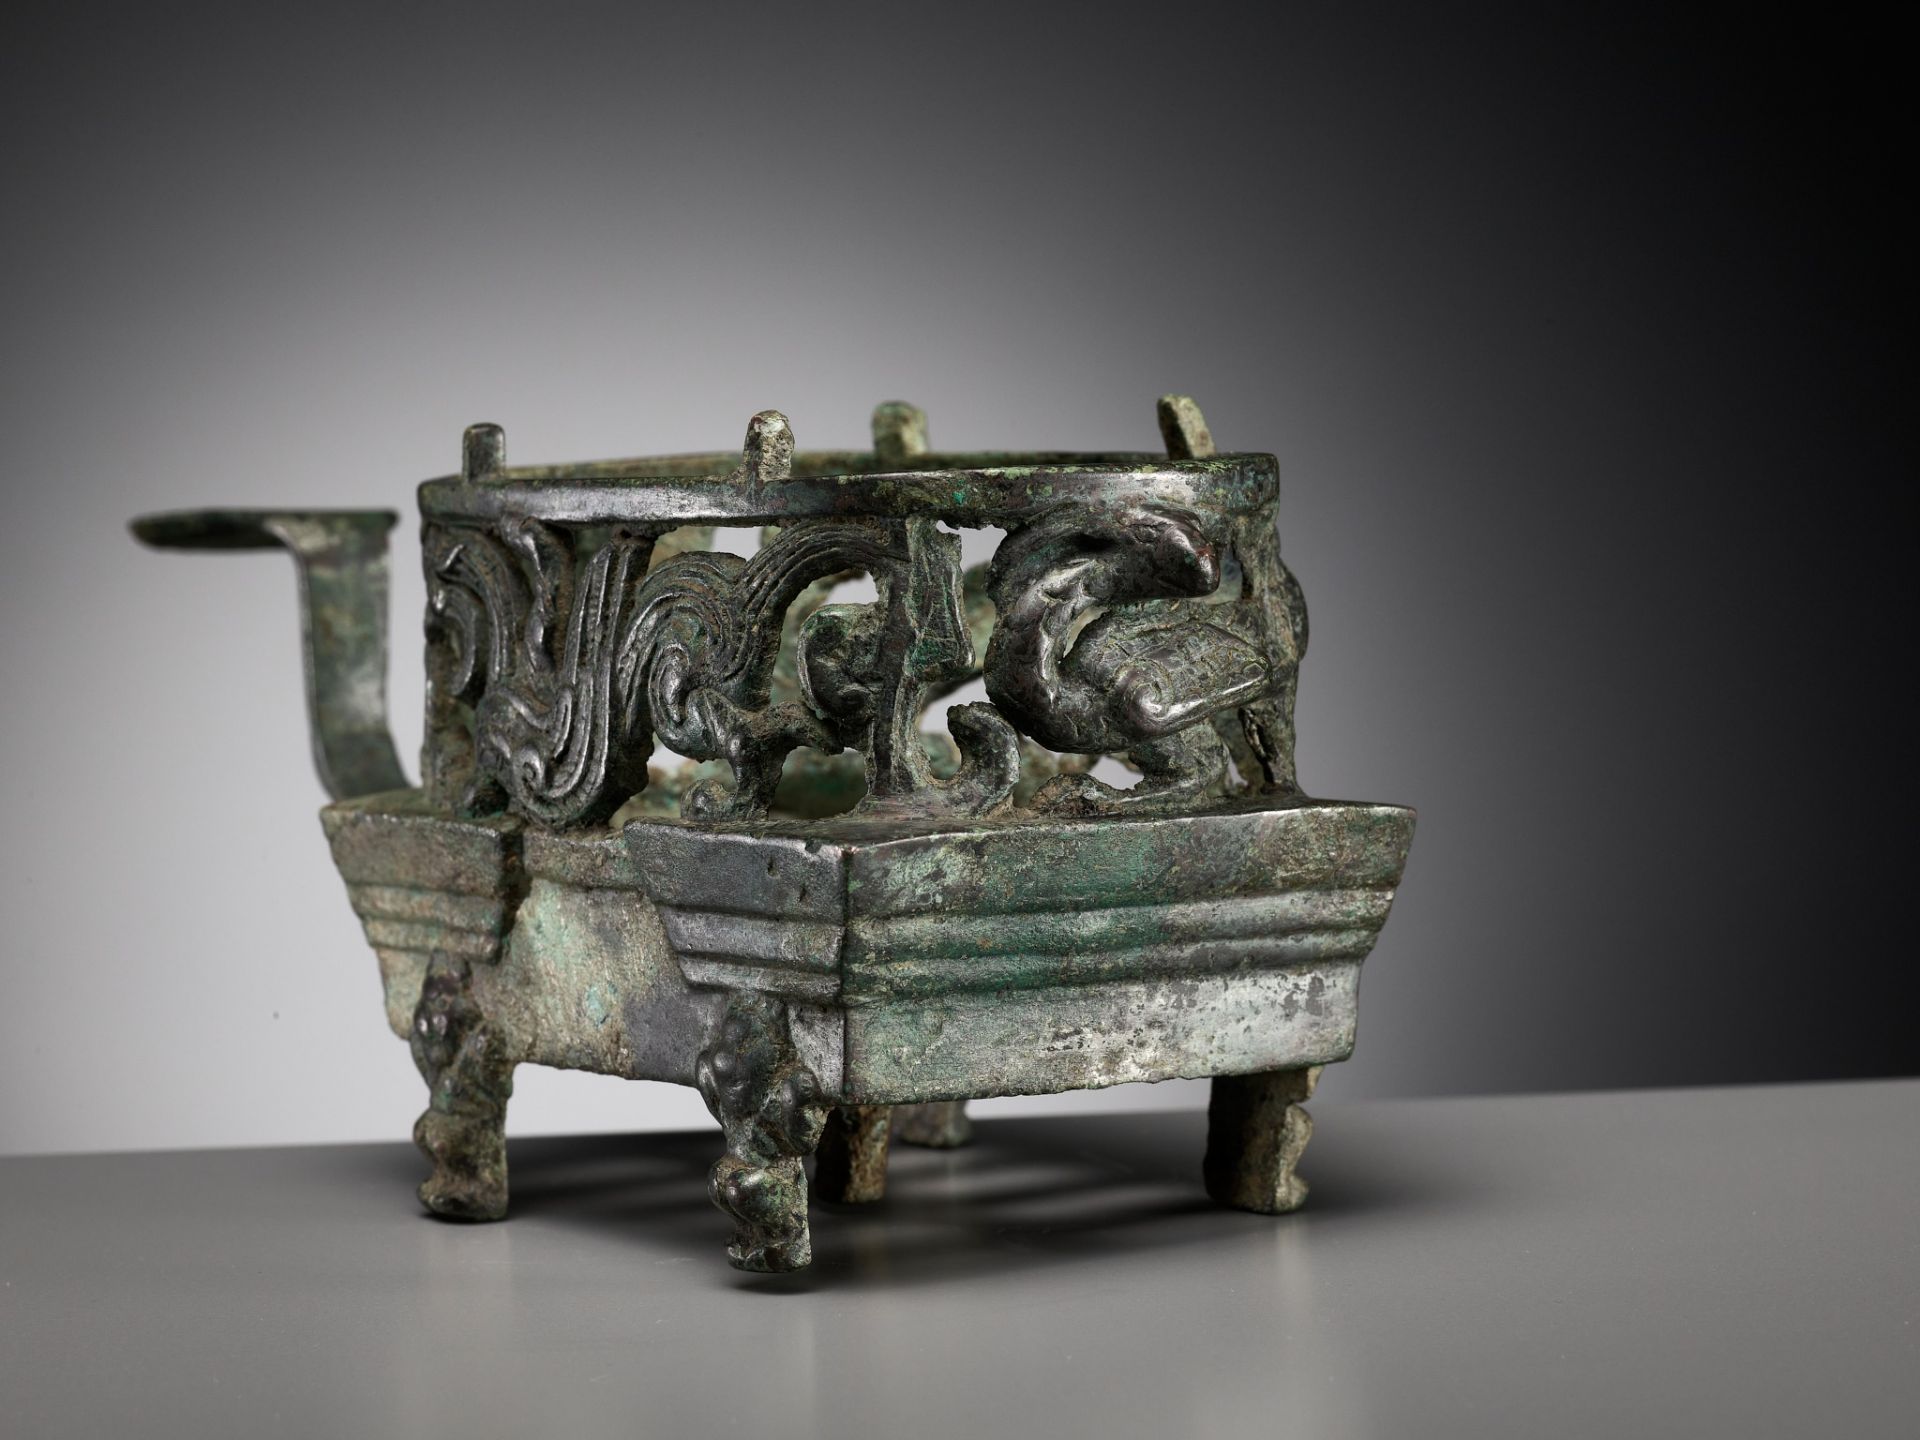 A 'FOUR AUSPICIOUS BEASTS' (SI XIANG) BRONZE BRAZIER, HAN DYNASTY, CHINA, 206 BC-220 AD - Image 3 of 16